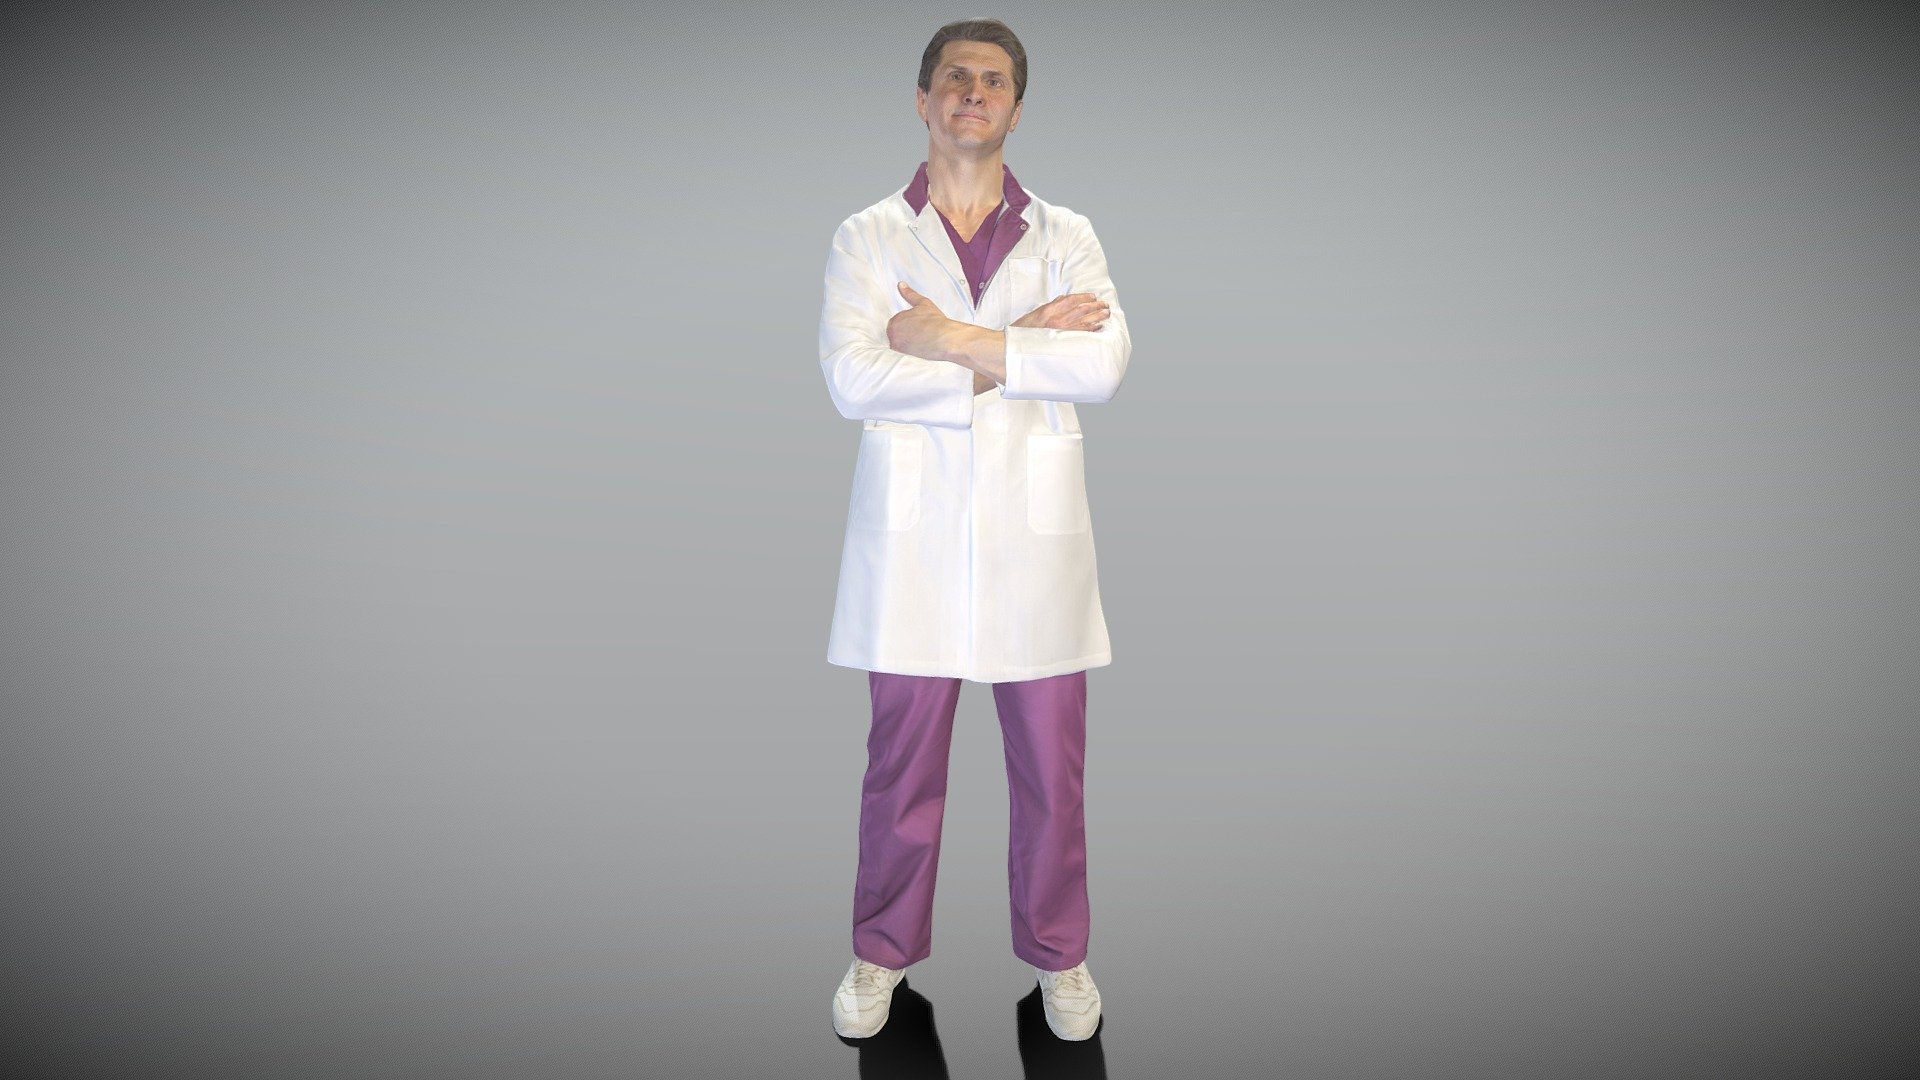 This is a true human size and detailed model of a adult man of Caucasian appearance dressed in a uniform of a surgical doctor. The model is captured in casual pose to be perfectly matching to variety of architectural visualization, background character, product visualization, e.g. advert banners, professional products/devices presentations, VR/AR content etc.

Technical characteristics:




digital double 3d scan model

decimated model (100k triangles)

sufficiently clean

PBR textures: Diffuse, Normal, Specular maps

non-overlapping UV map

Download package includes Cinema 4D project file with Redshift shader, OBJ, FBX files, which are applicable for 3ds Max, Maya, Unreal Engine, Unity, Blender, etc. All the textures you will find in the Tex folder, included into the main archive.

You may find some of our 3d models in free access on SketchFab https://sketchfab.com/deep3dstudio/collections/sample-basic-3d-models

New 3d models every day - Smiling male doctor with crossed arms 320 - Buy Royalty Free 3D model by deep3dstudio 3d model